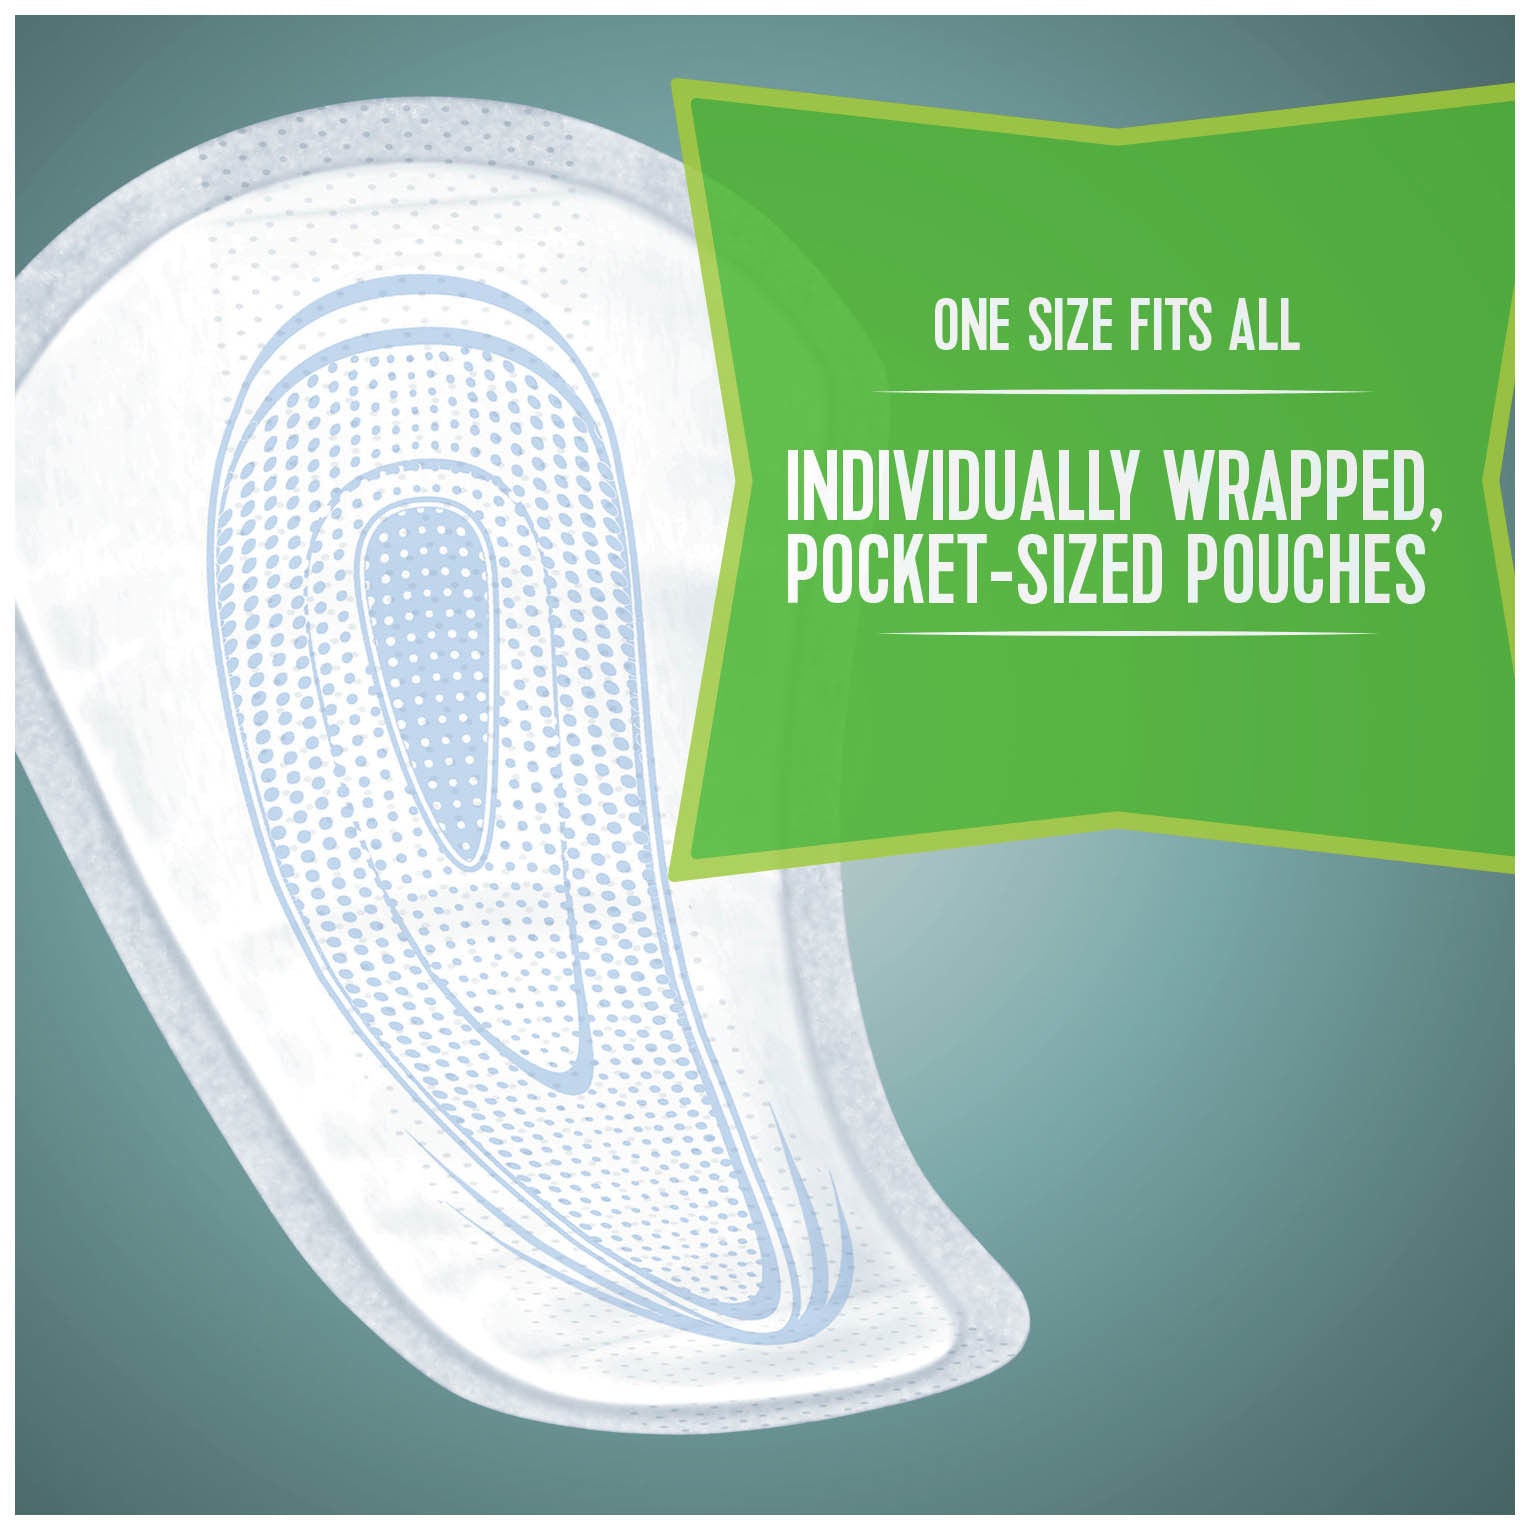 Incontinence Shields Depends for Men disposable guards shields for